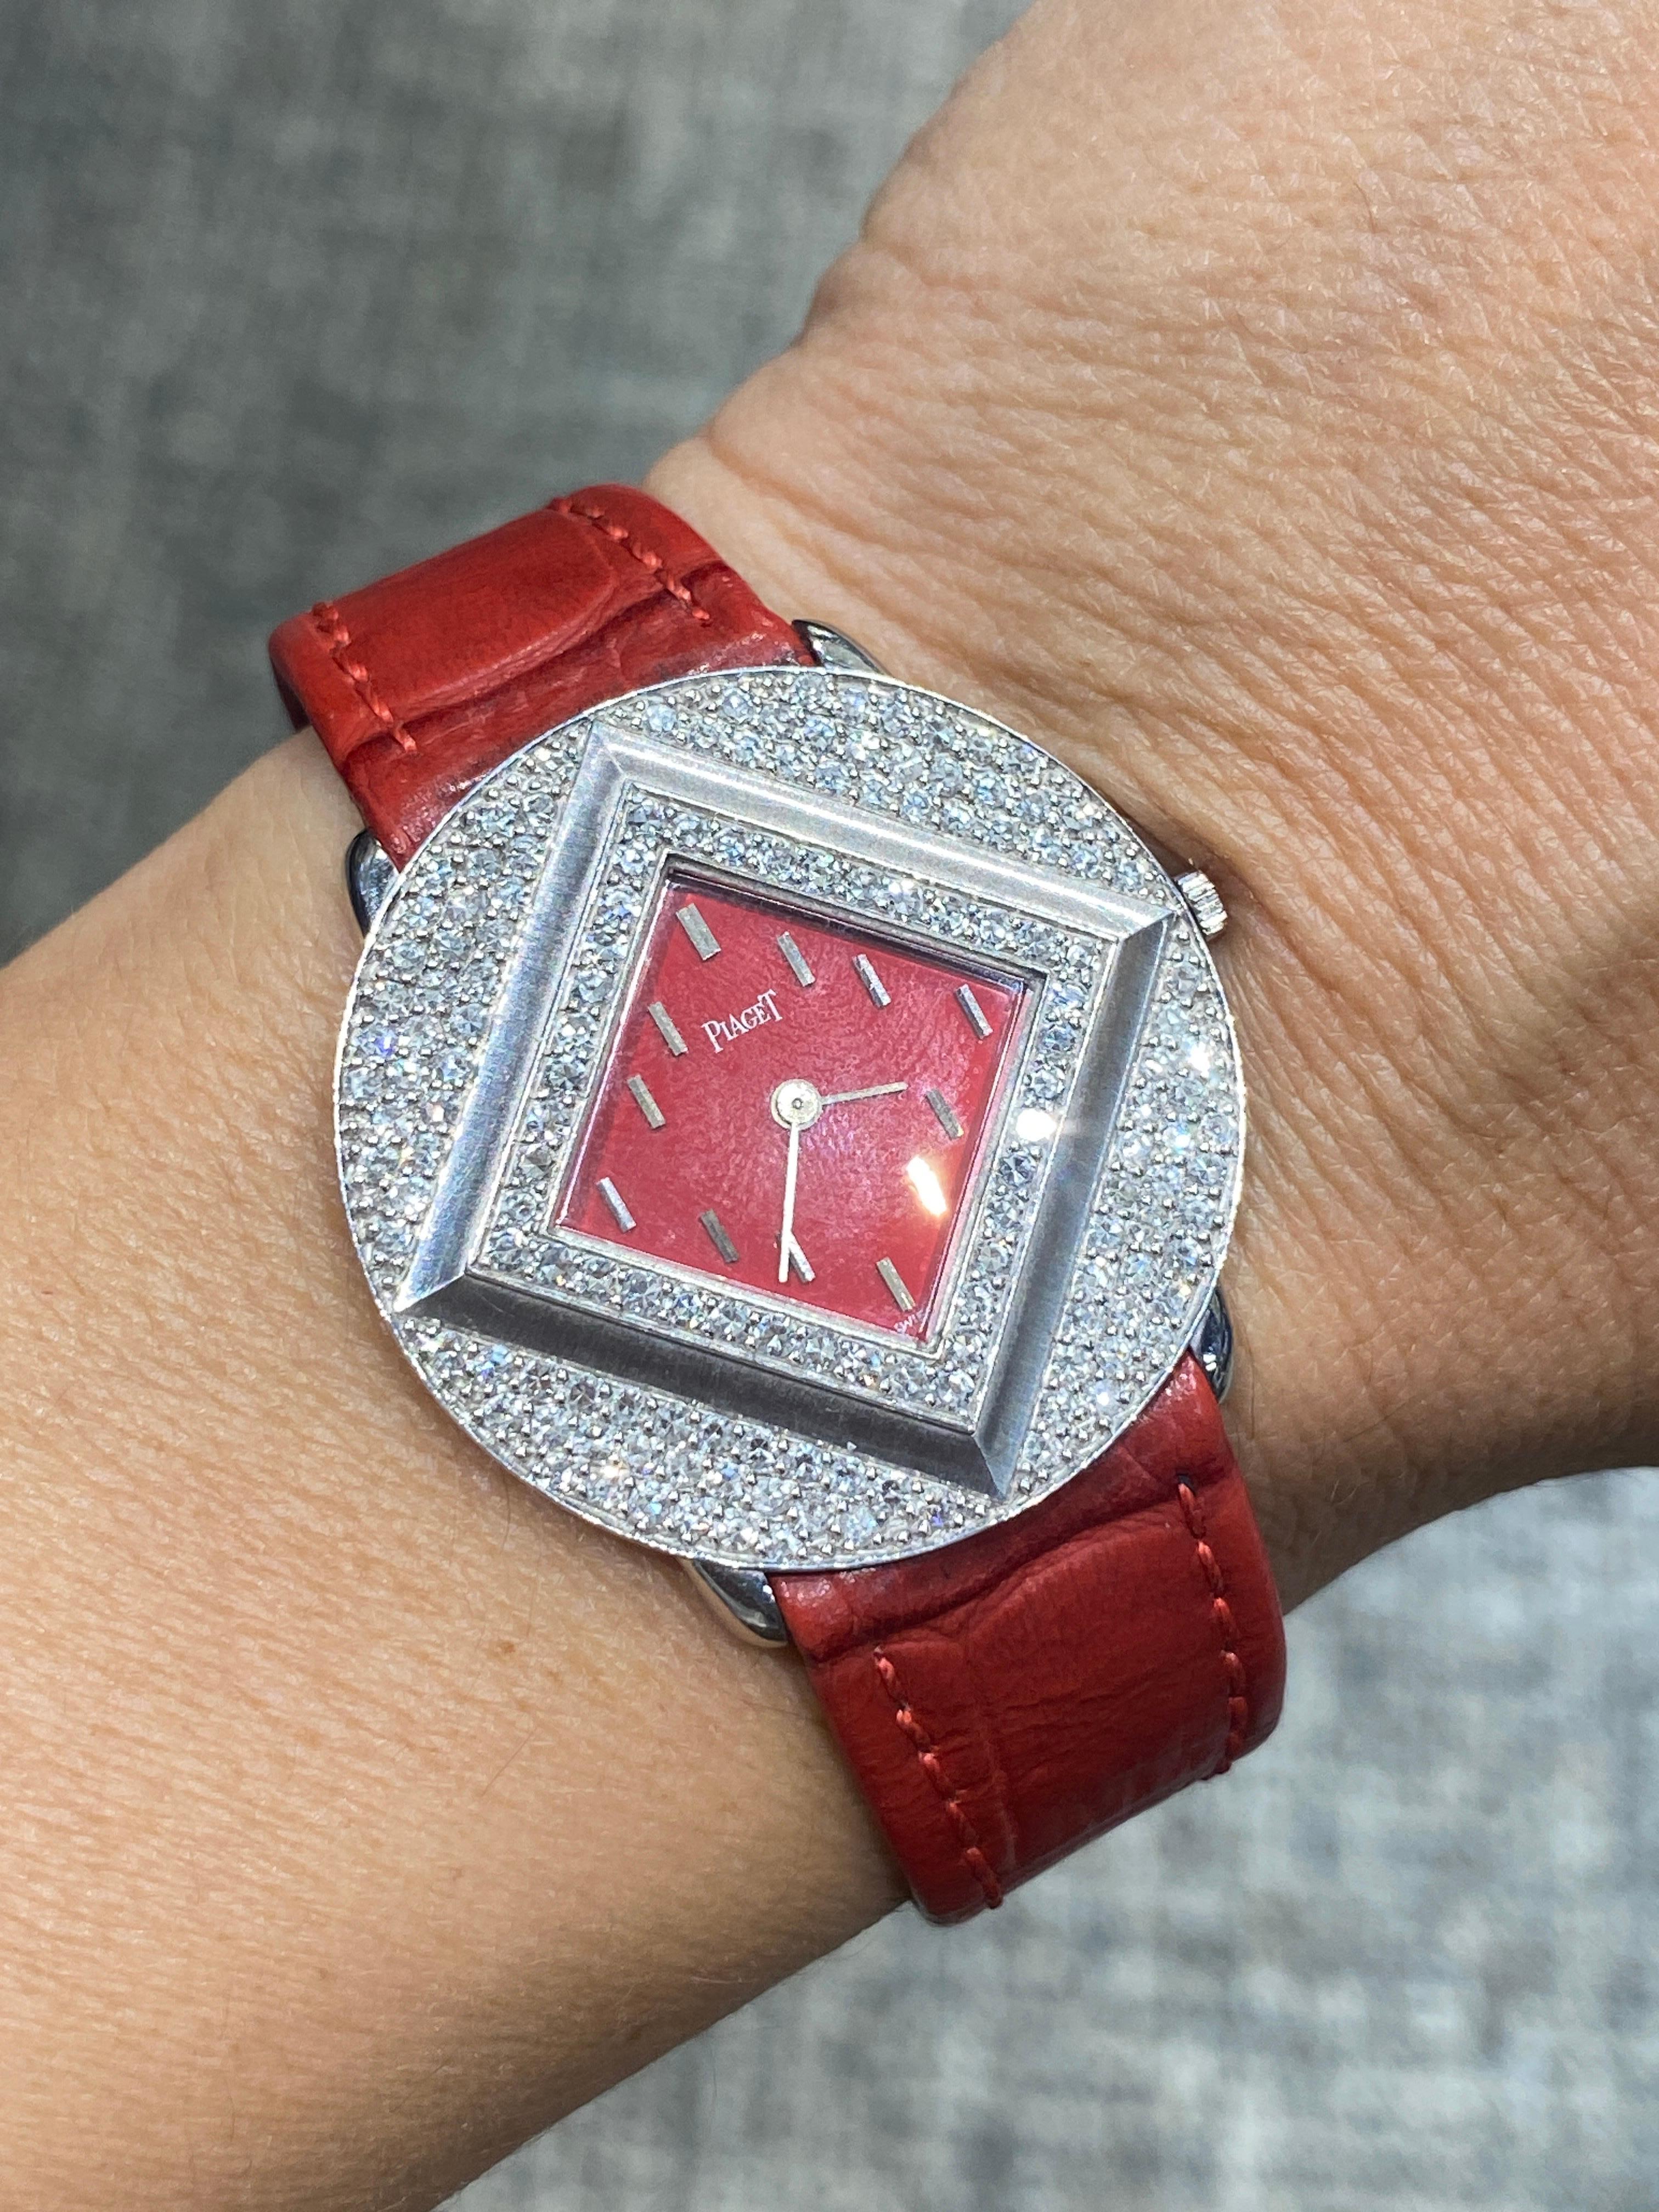 This very rare Piaget watch has a red enamel square dial within an 18 carat white gold circular frame adorned with diamonds. It is made in Switzerland, dates back to 1970s and is a wind-up watch. It is a striking piece and would make a great